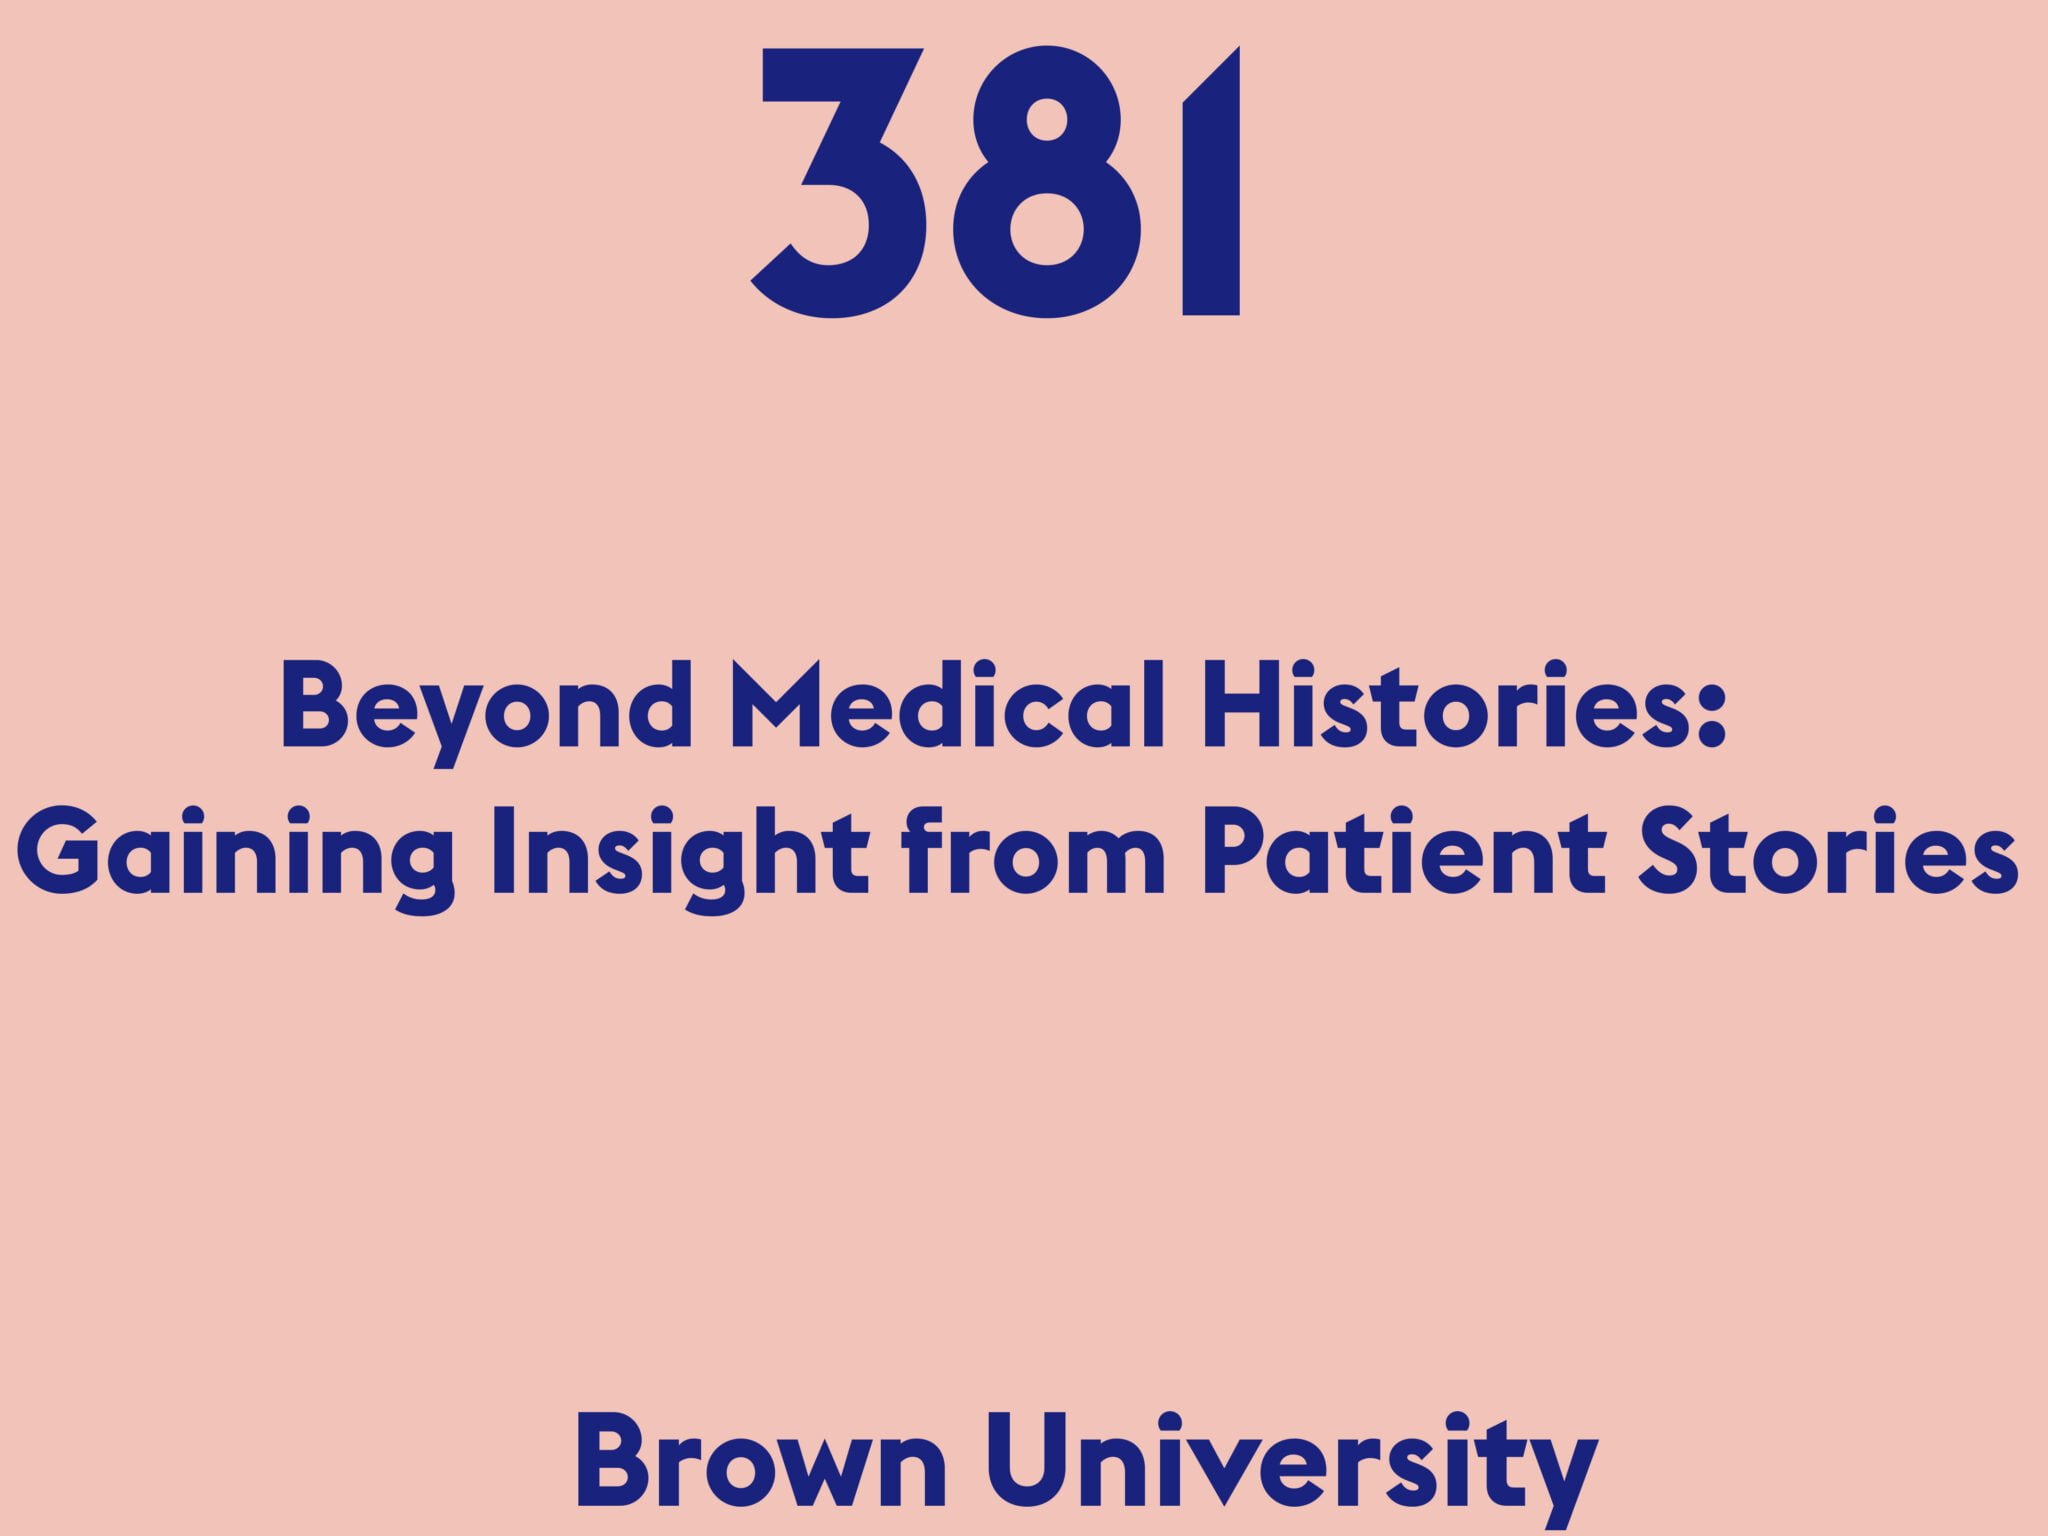 Beyond Medical Histories: Gaining Insight from Patient Stories